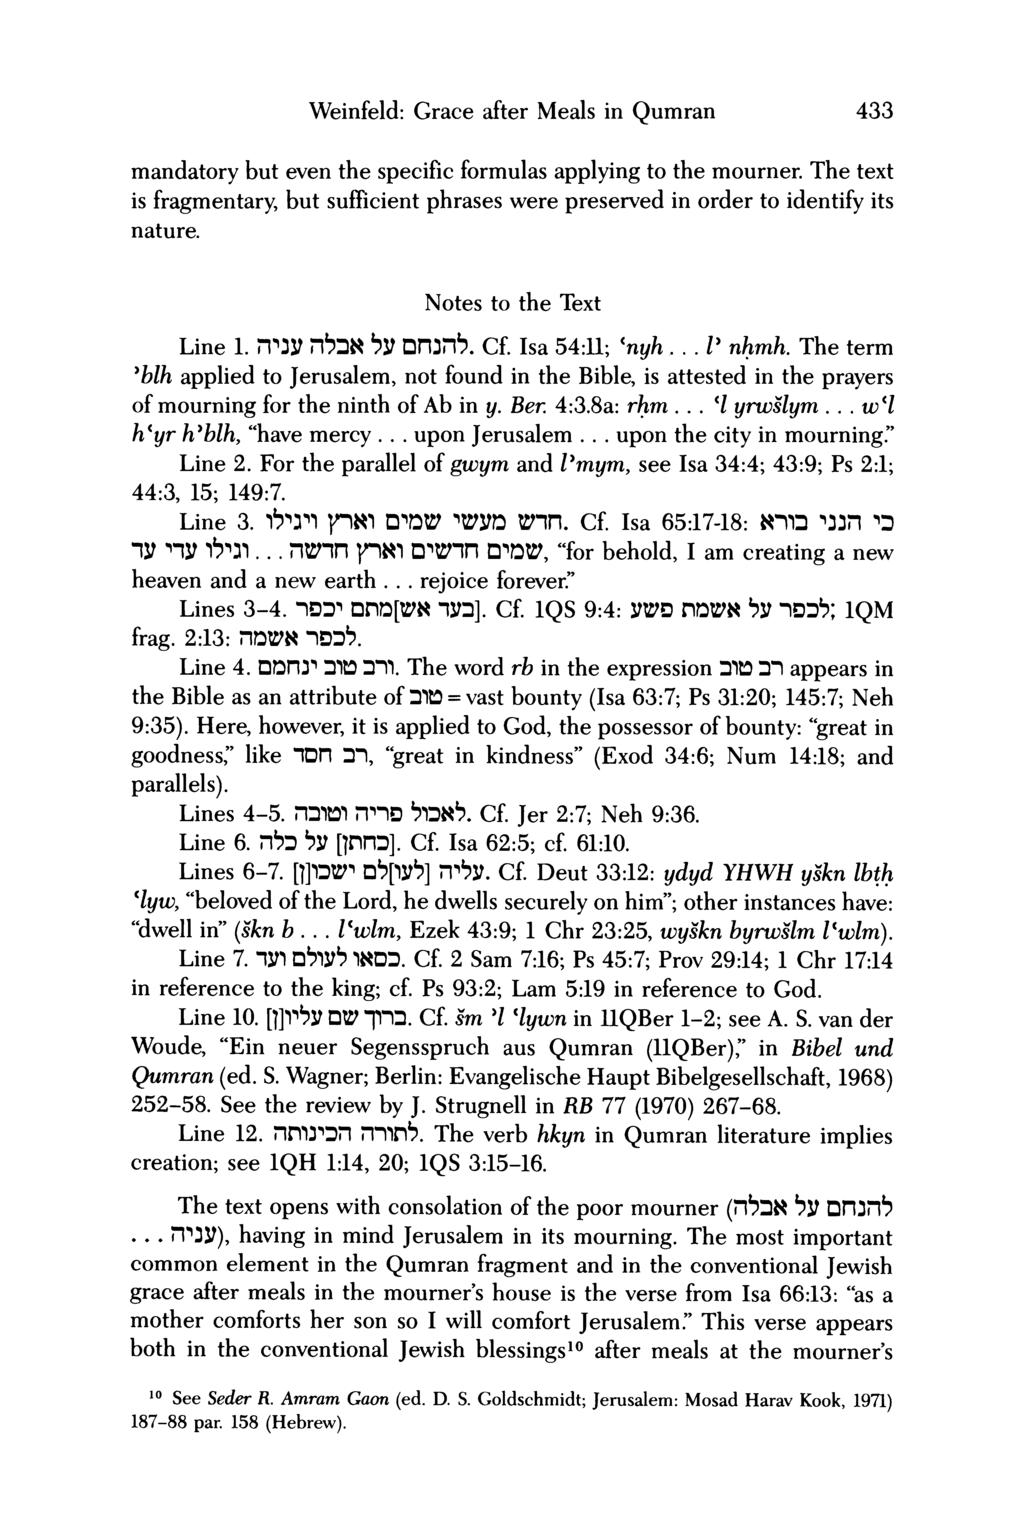 Weifeld: Grace after Meals i Qumra 433 madatory but eve the specific formulas applyig to the mourer. The text is fragmetary, but sufficiet phrases were preserved i order to idetify its ature.